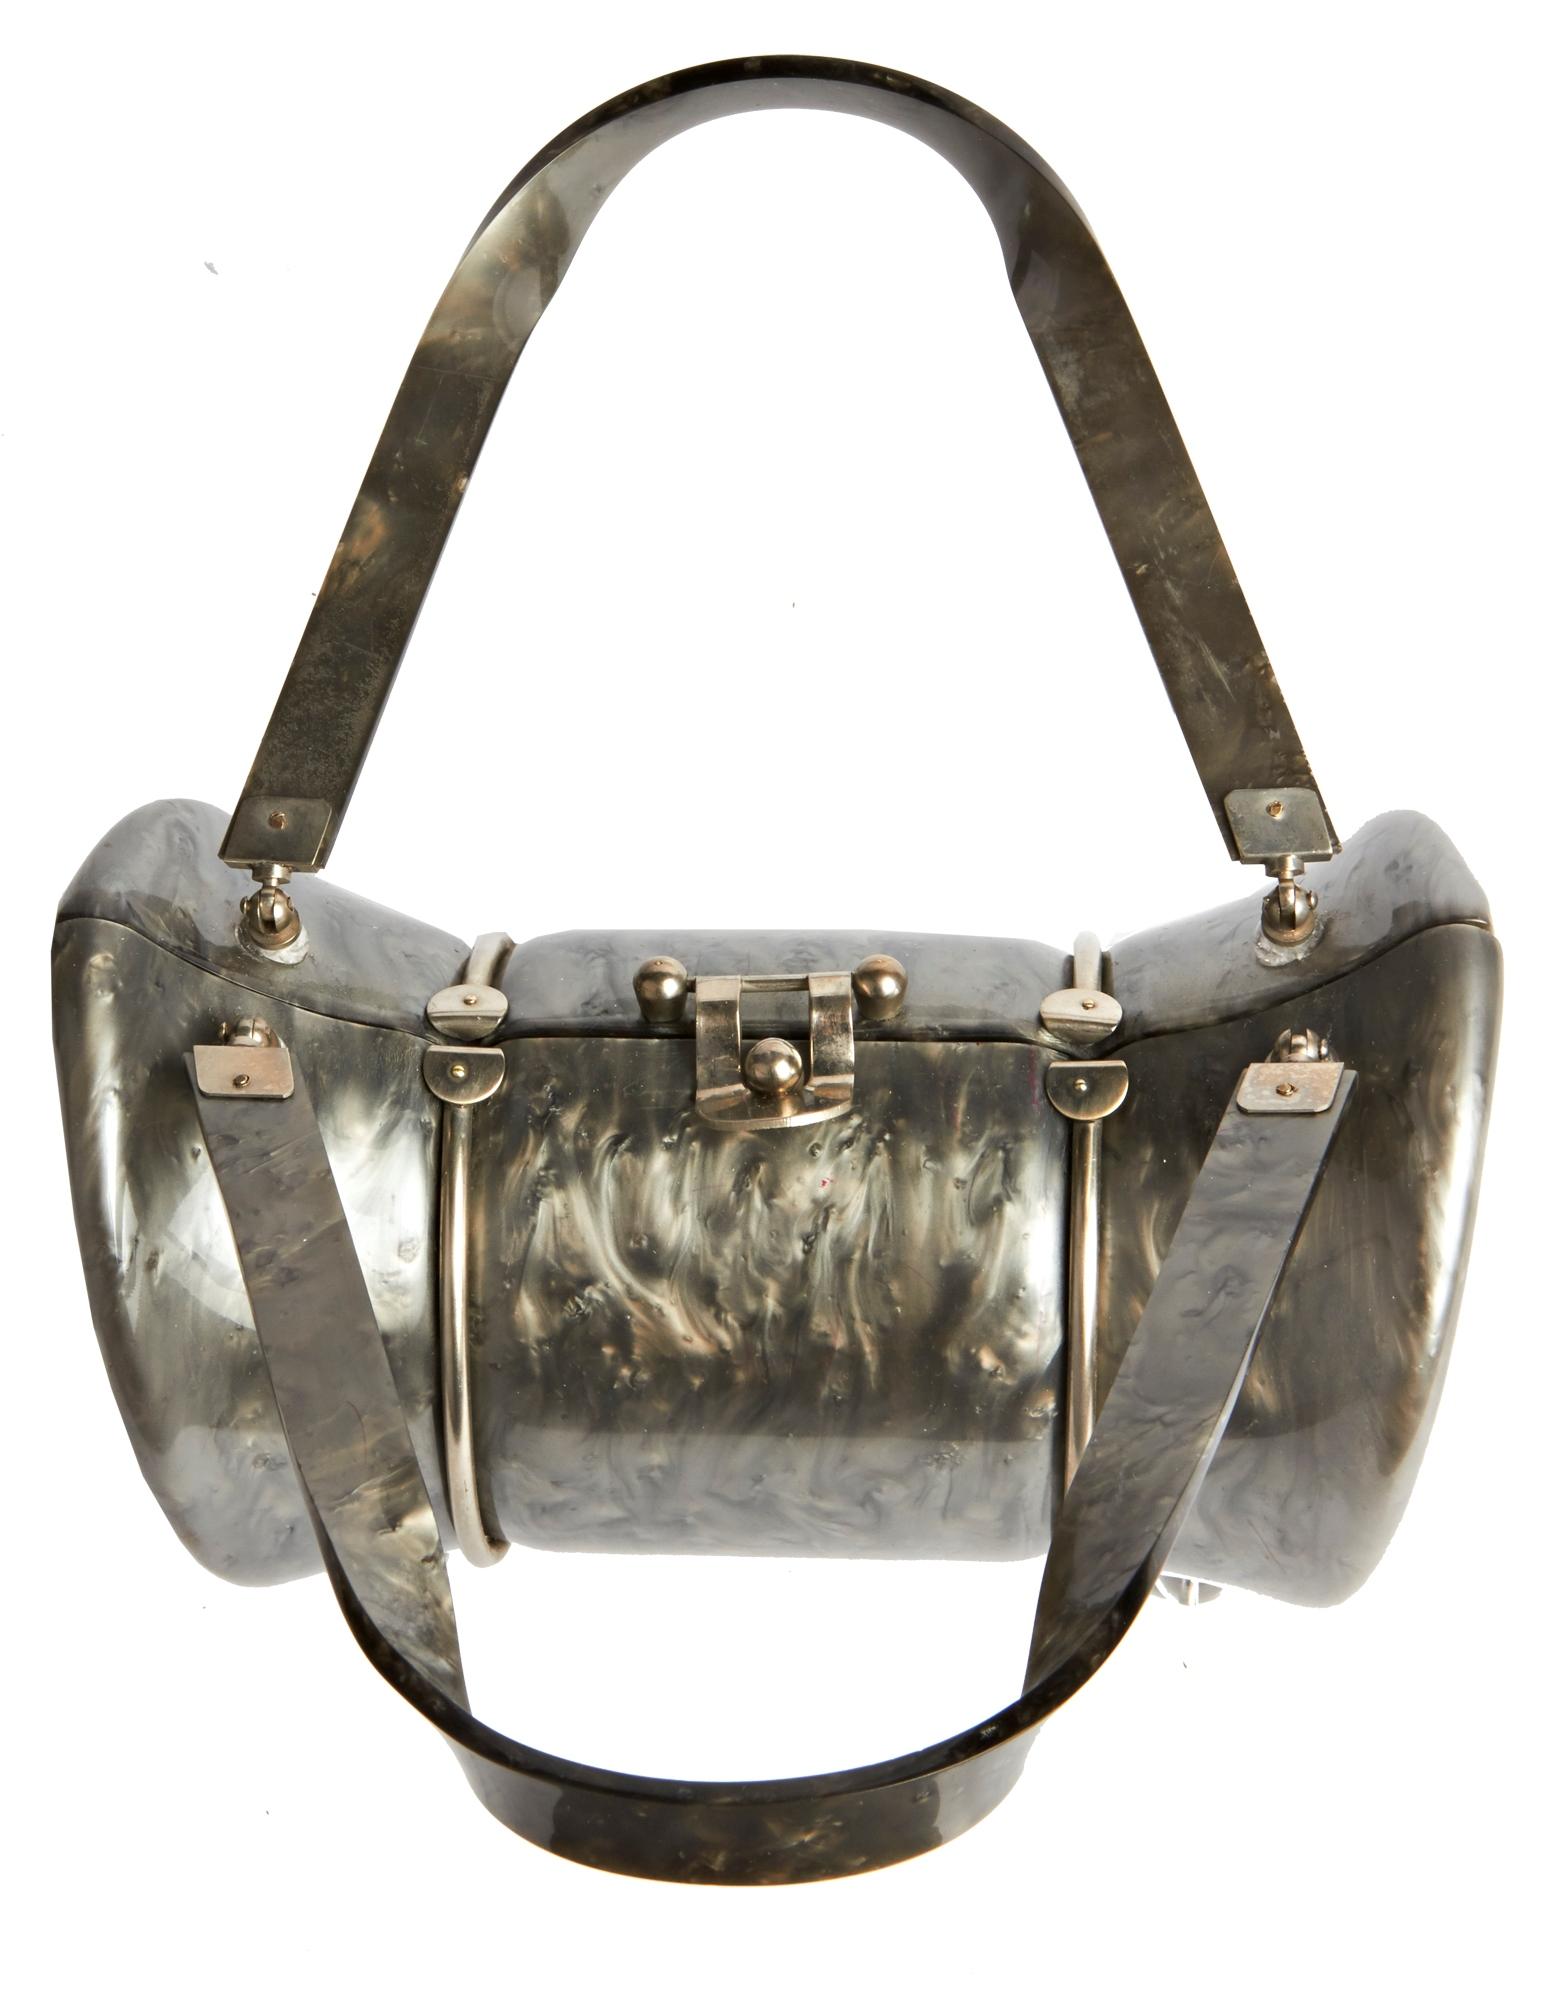 This eccentrically designed American Lucite handbag is by LLewellyn Inc of Madison Avenue, New York and is part of their Lewsid Jewel range. The body and chrome hinged handles are in pearlescent marbled grey Lucite which is wrapped in chrome and